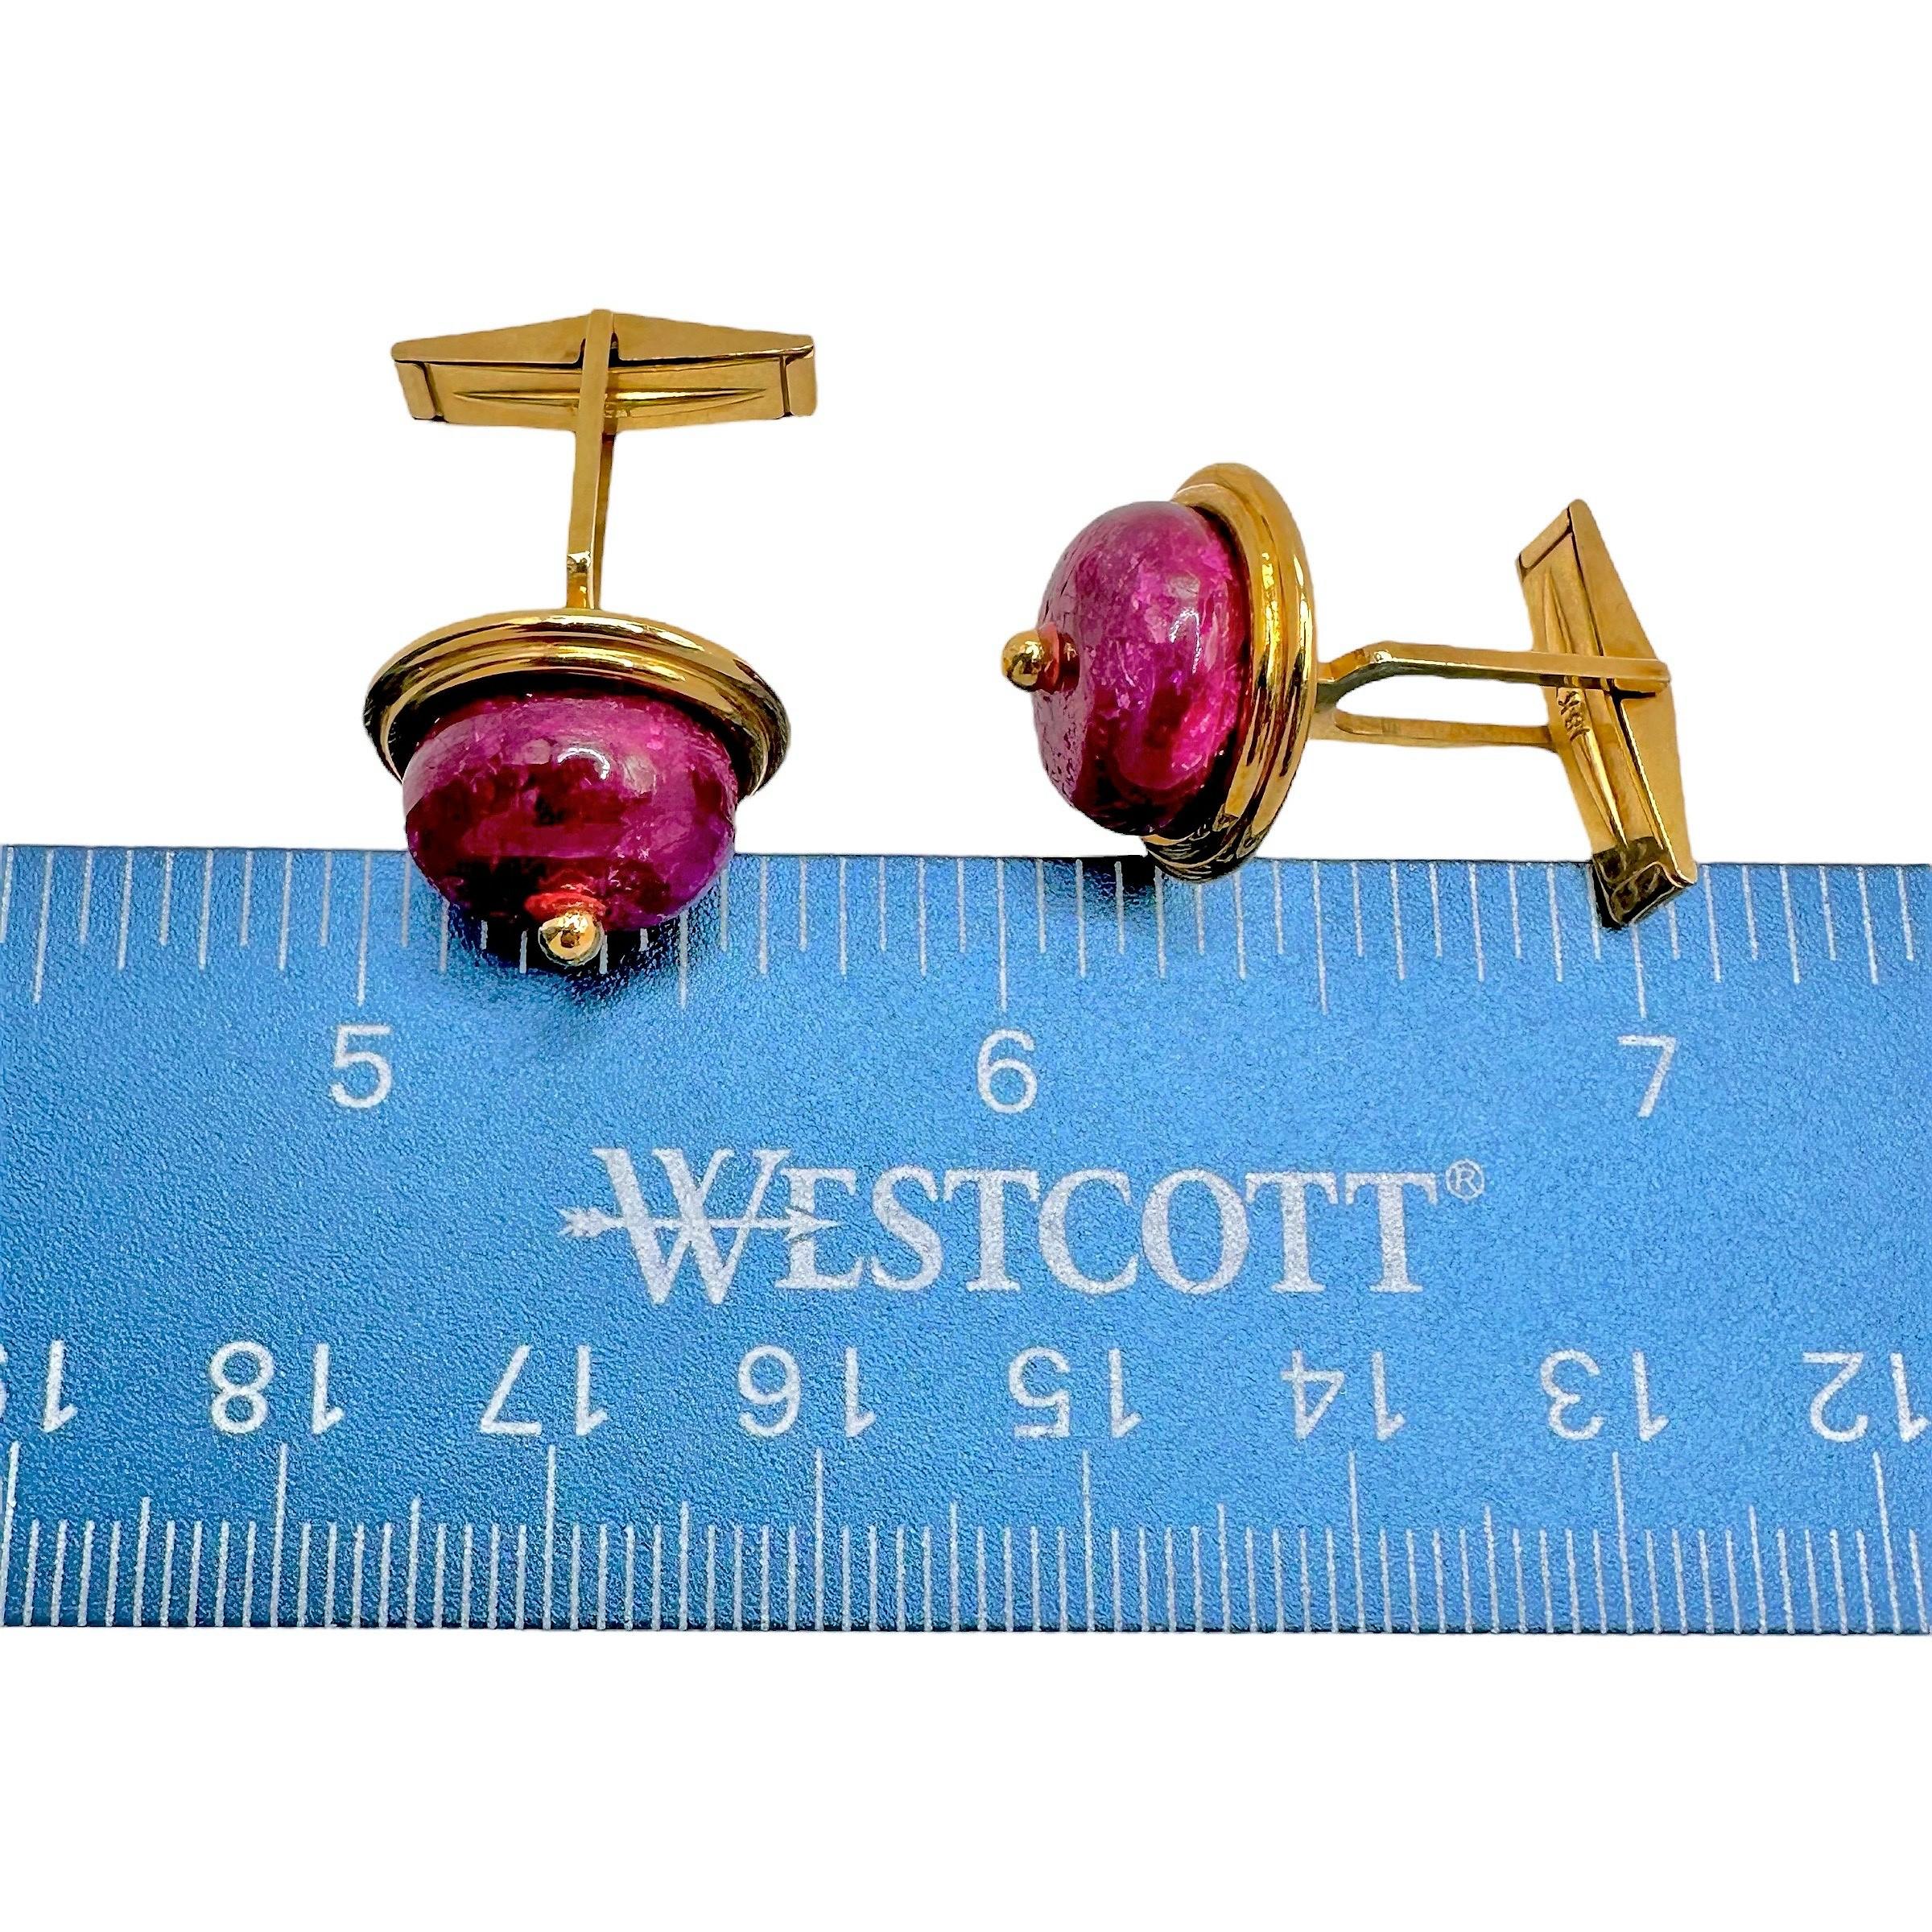 Modern Vintage Emis Beros Gold Cuff Links with Vivid Ruby Bead Centers For Sale